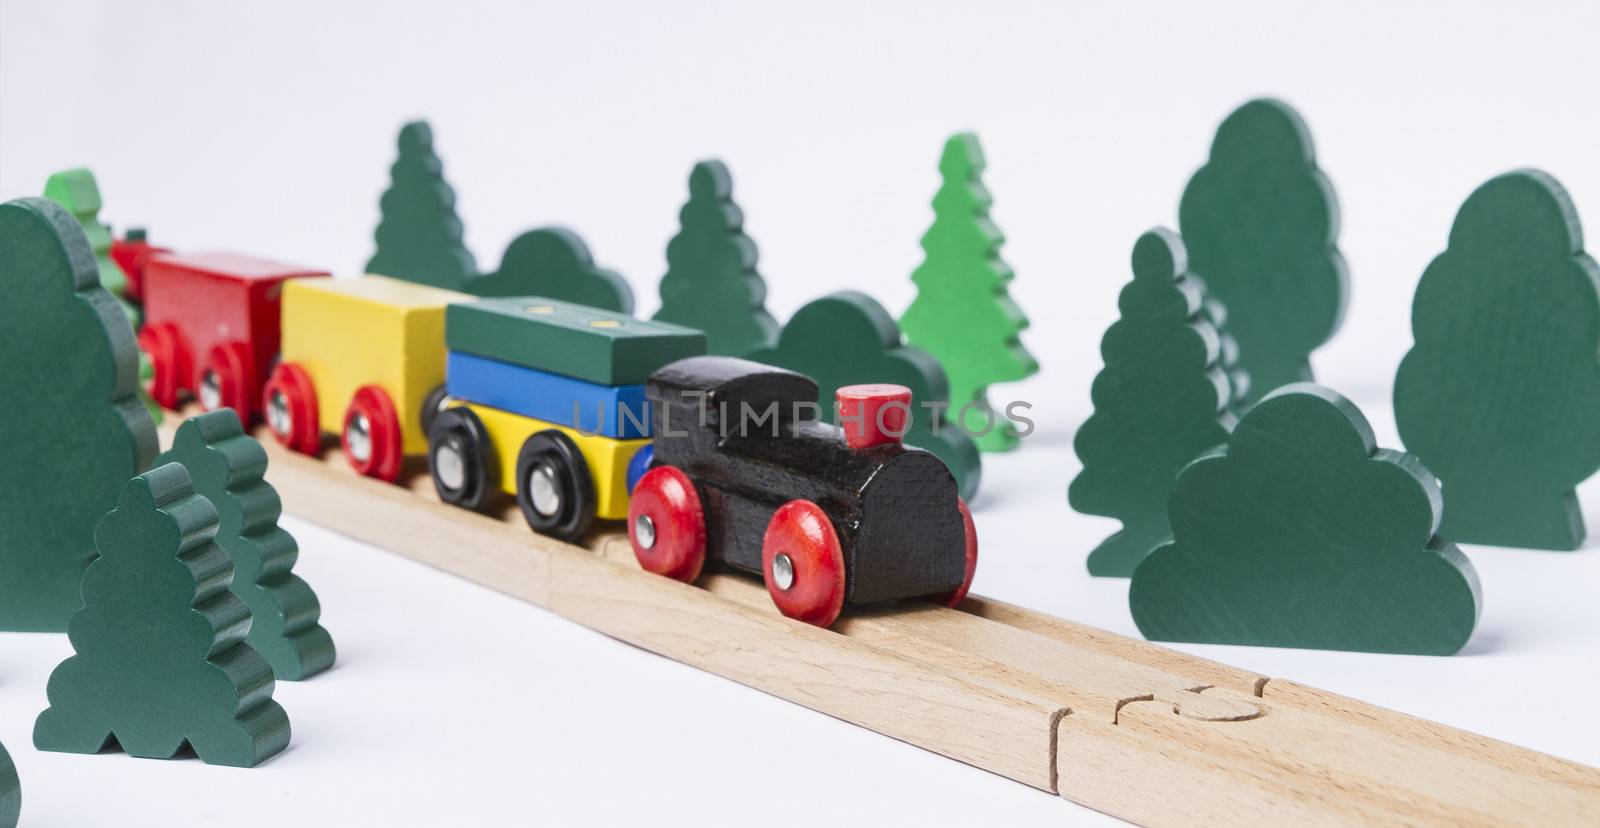 black wooden toy train in rural landscape made with simple toy trees